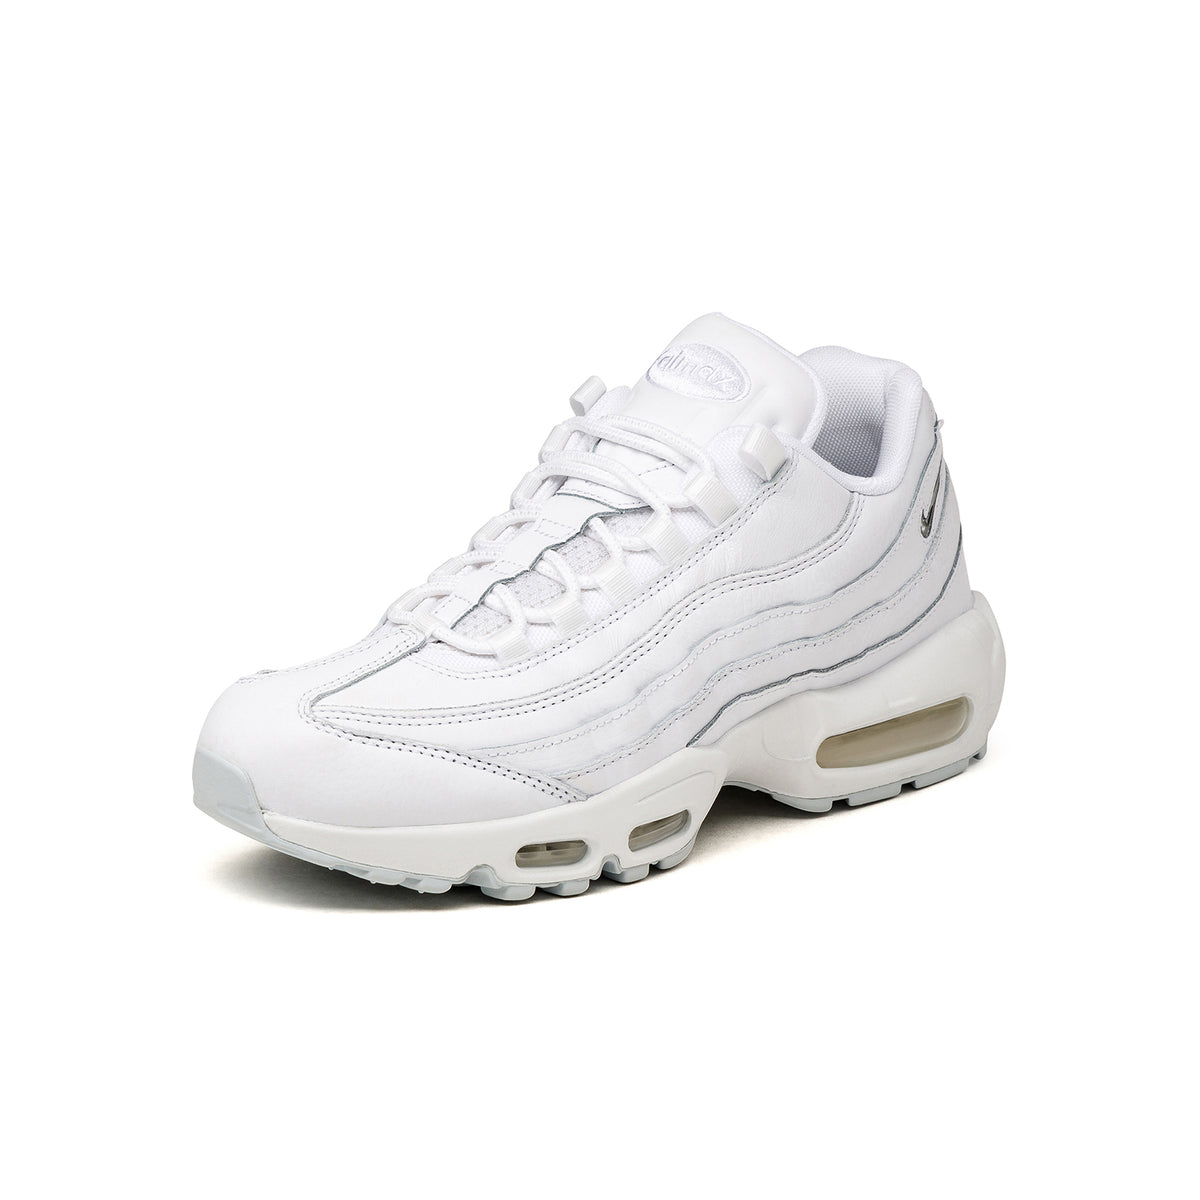 Nike Air Max 95 *Triple White Jewel* – buy now at Asphaltgold Online Store!